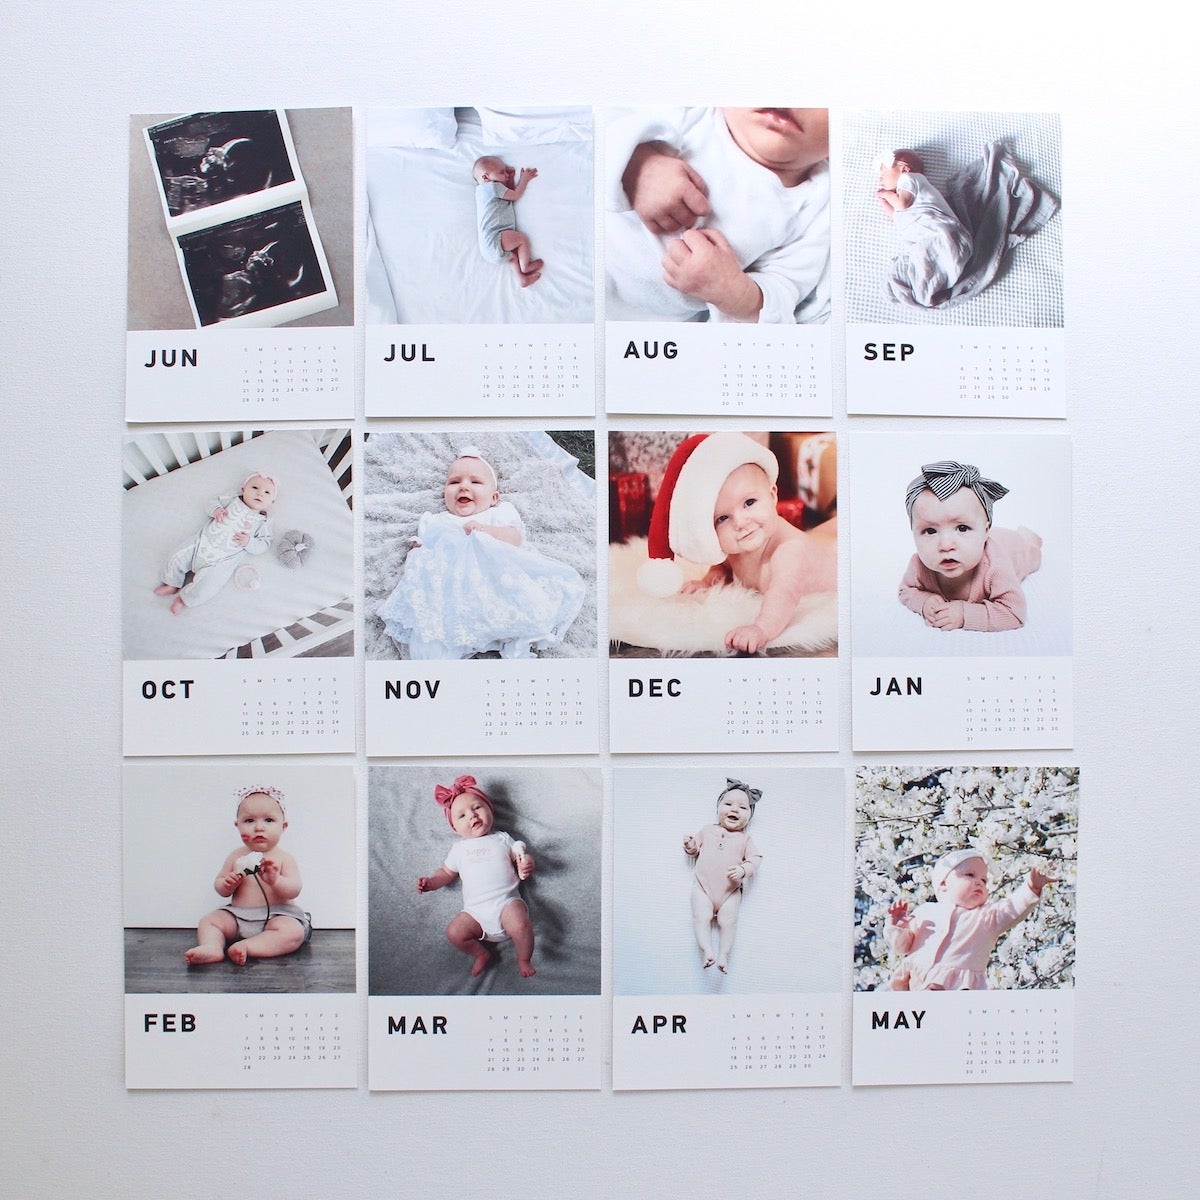 Calendar pages featuring baby photos laid out in grid